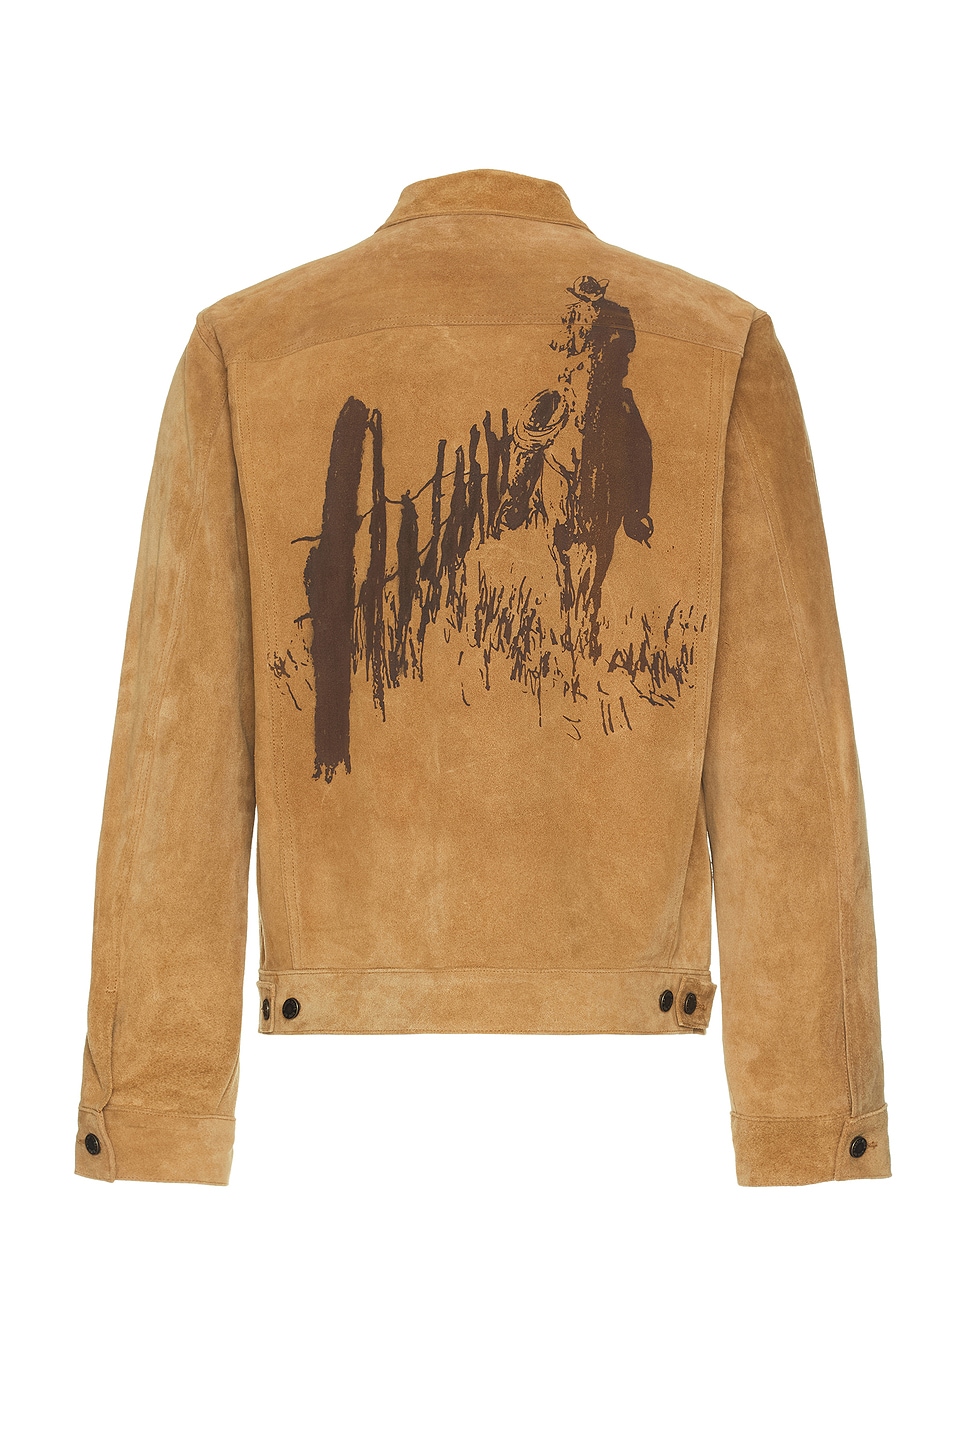 Image 1 of ONE OF THESE DAYS Along The Fence Trucker Jacket in Tobacco Suede